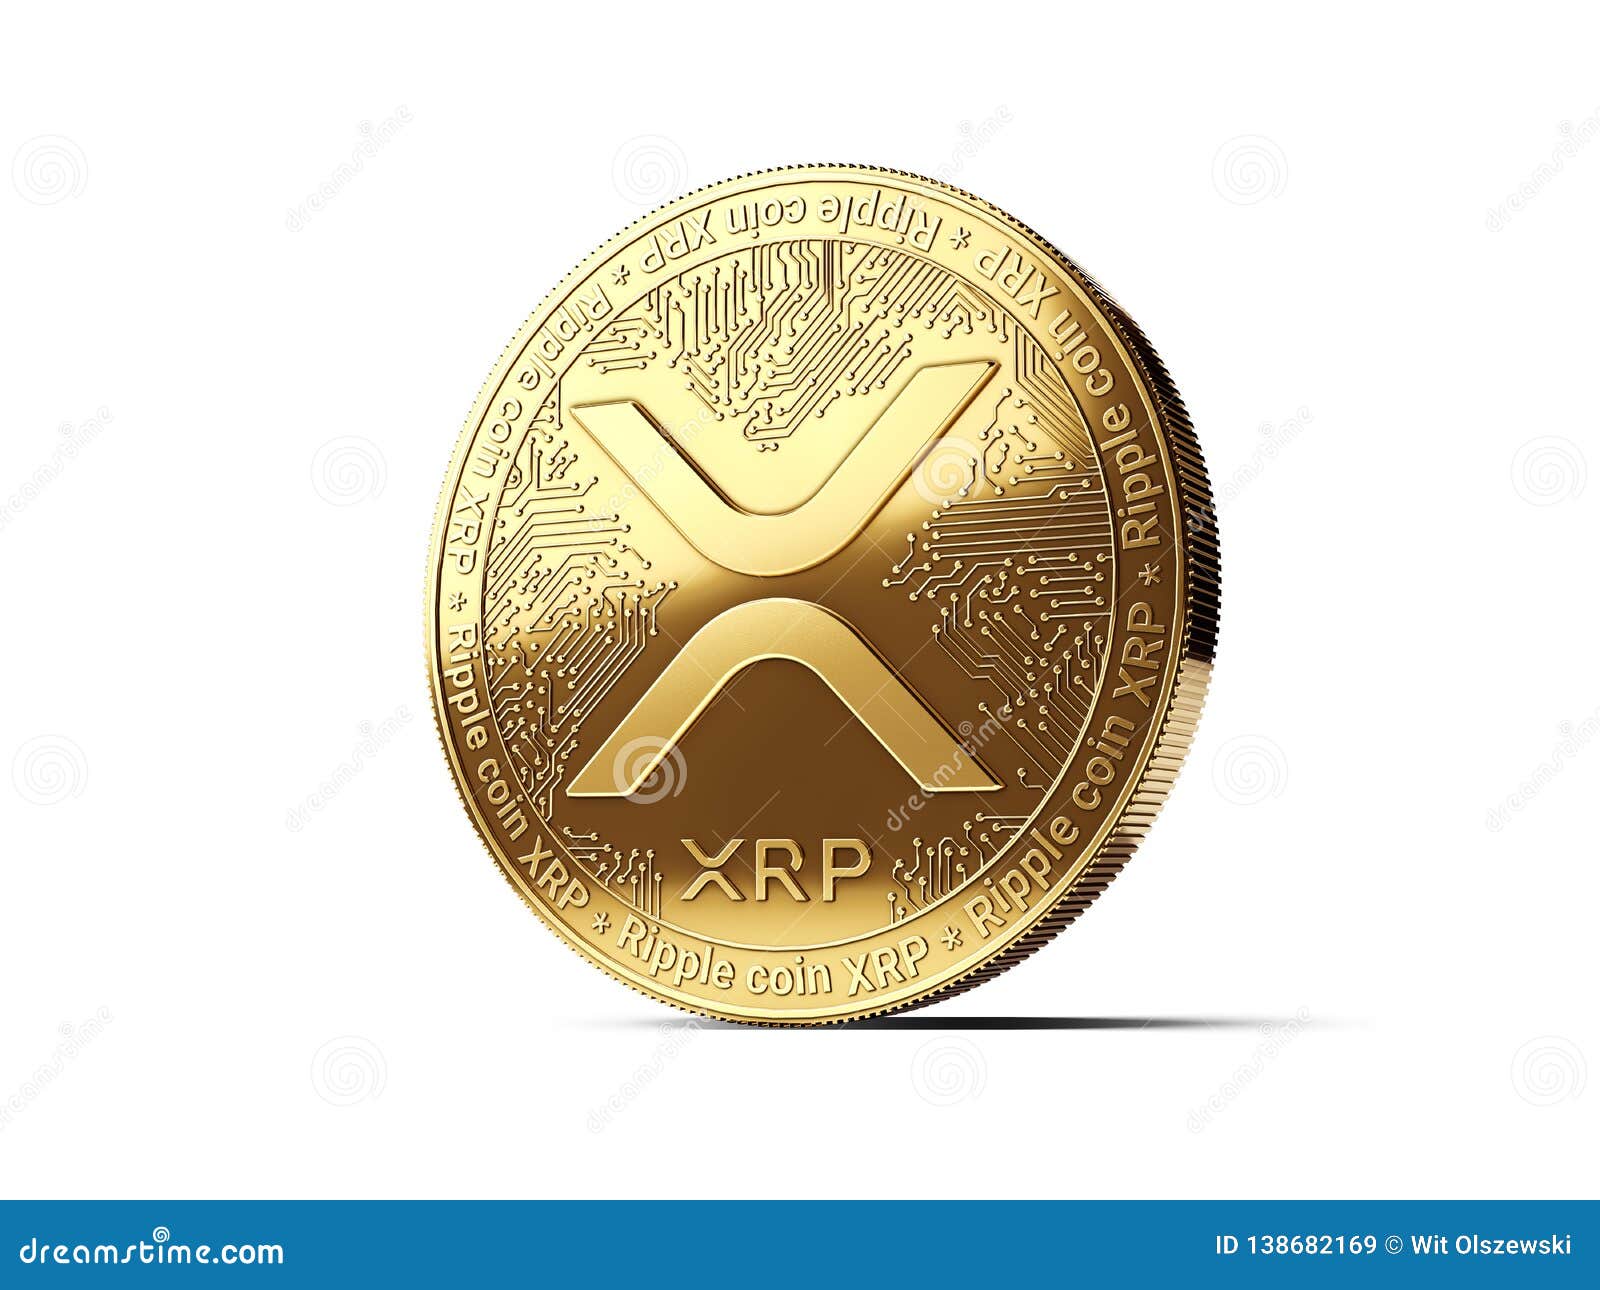 xrp free coin